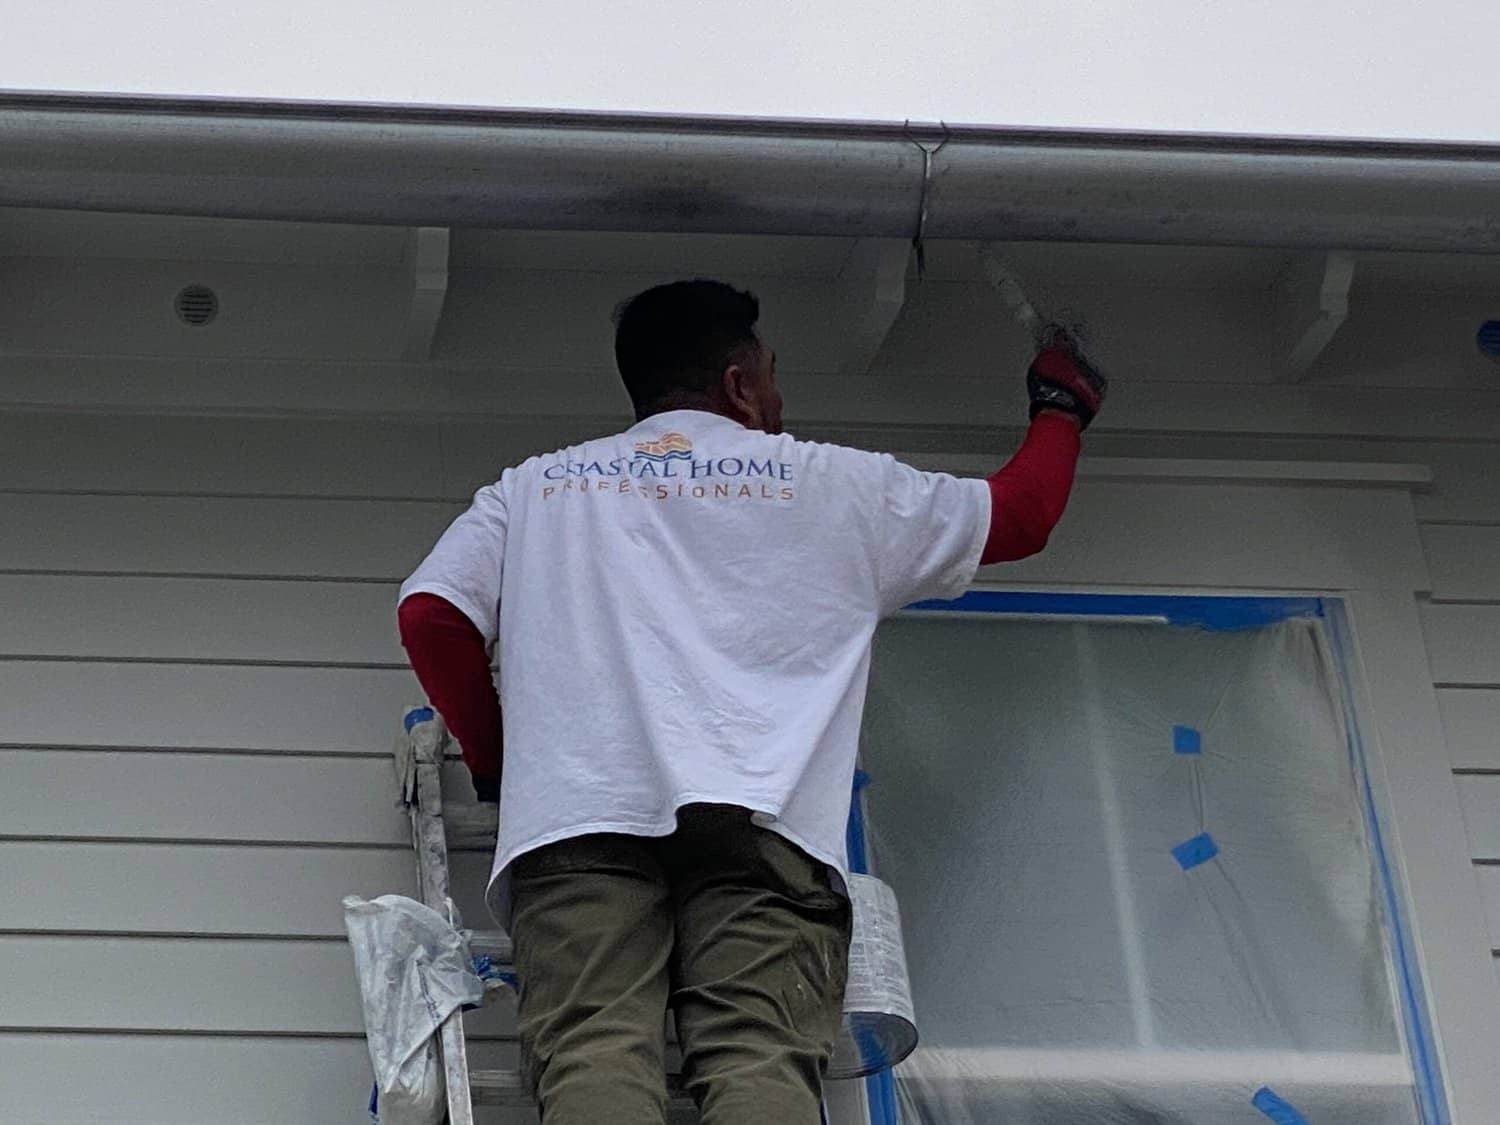 Coastal Home Professional painter is painting the eaves of the roof